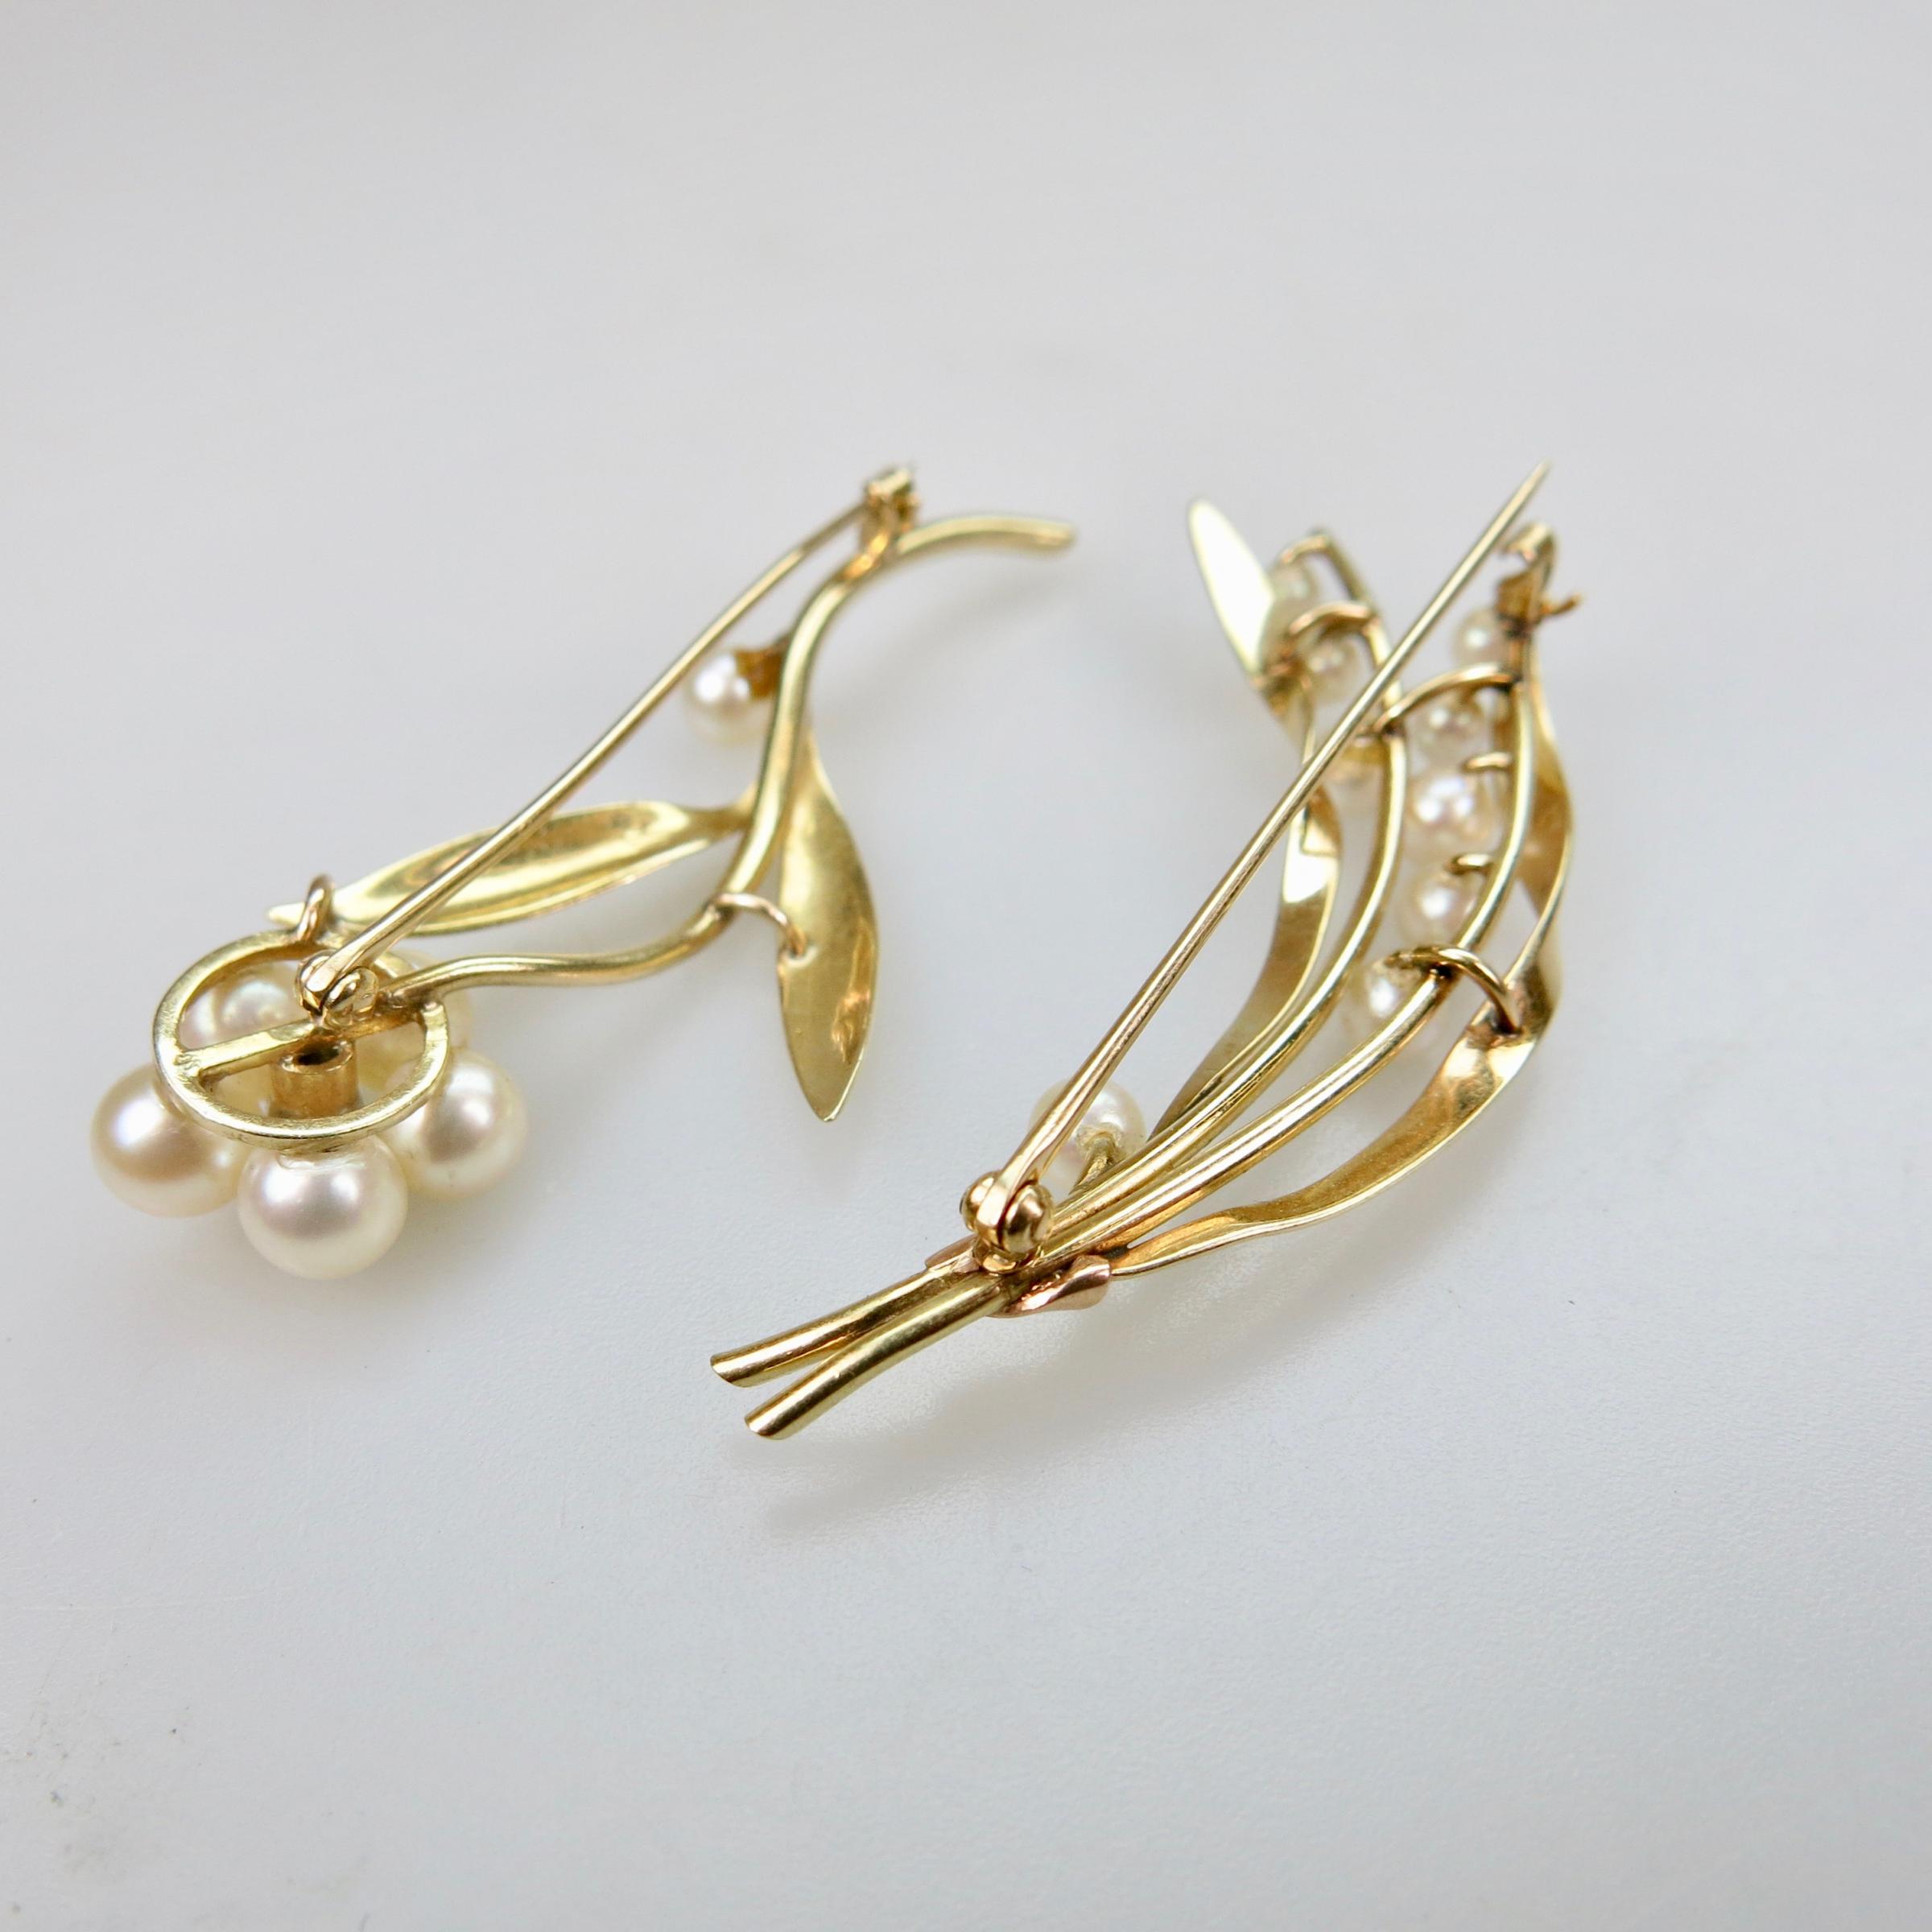 2 x 14k Yellow Gold Spray Brooches